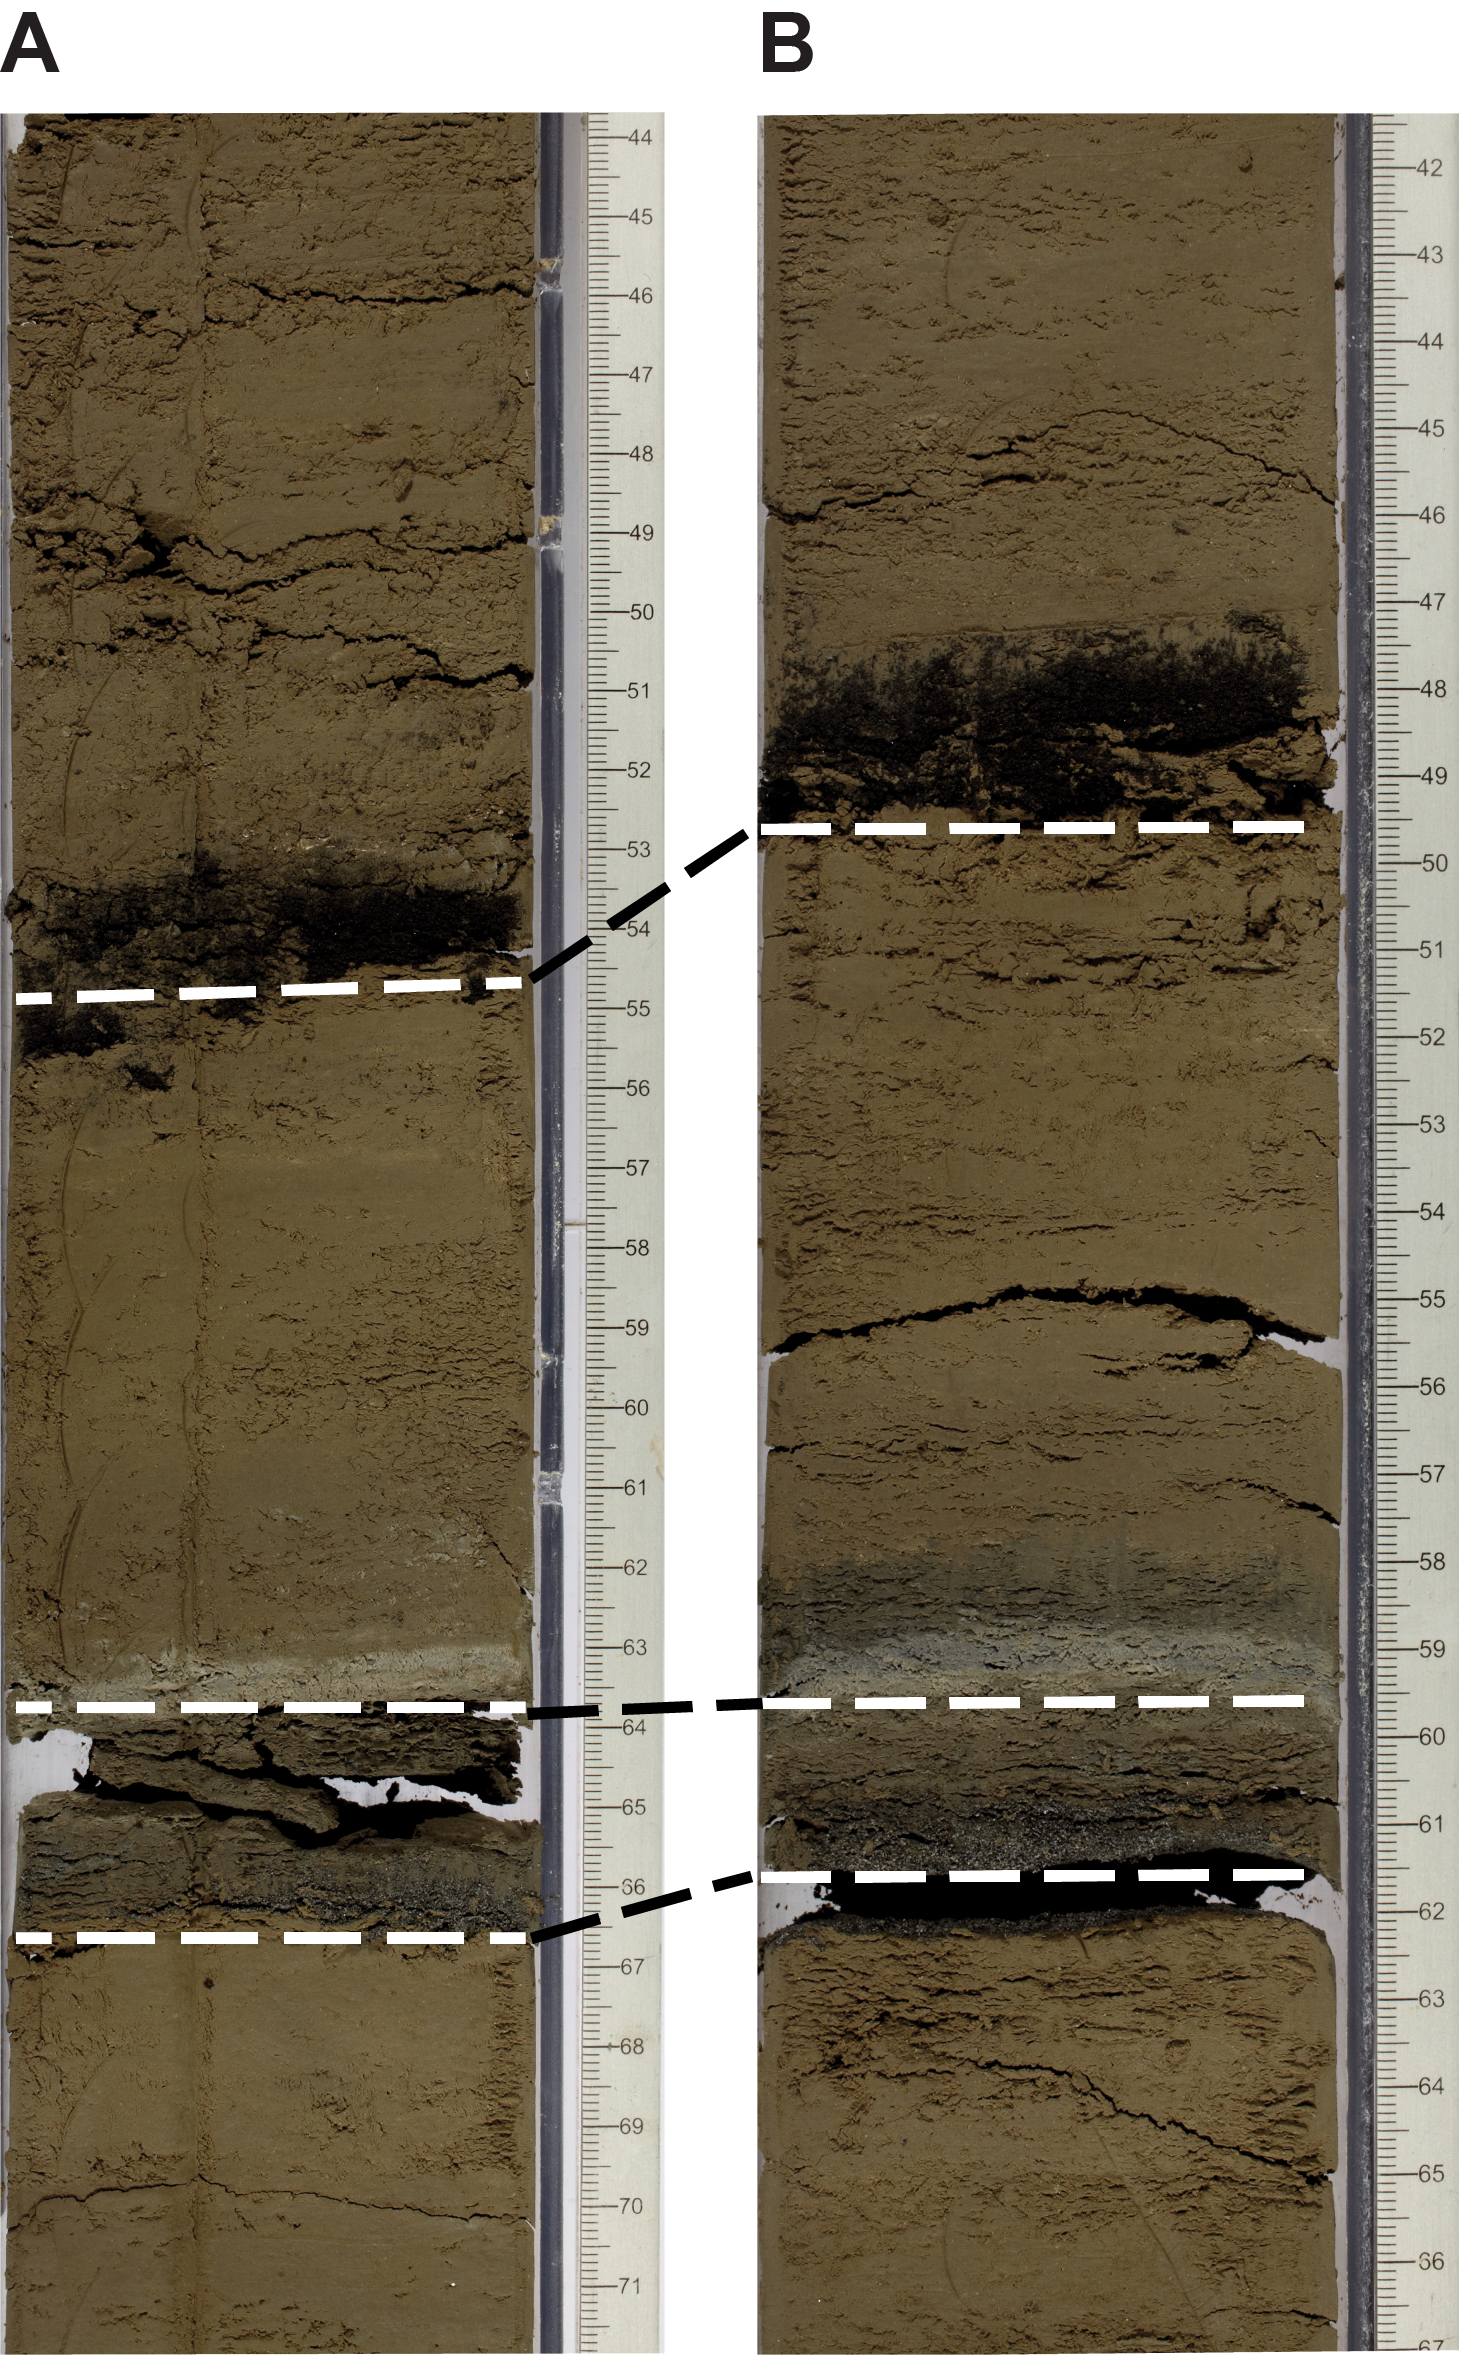 http://publications.iodp.org/proceedings/385/103/figures/385_103_F14.png